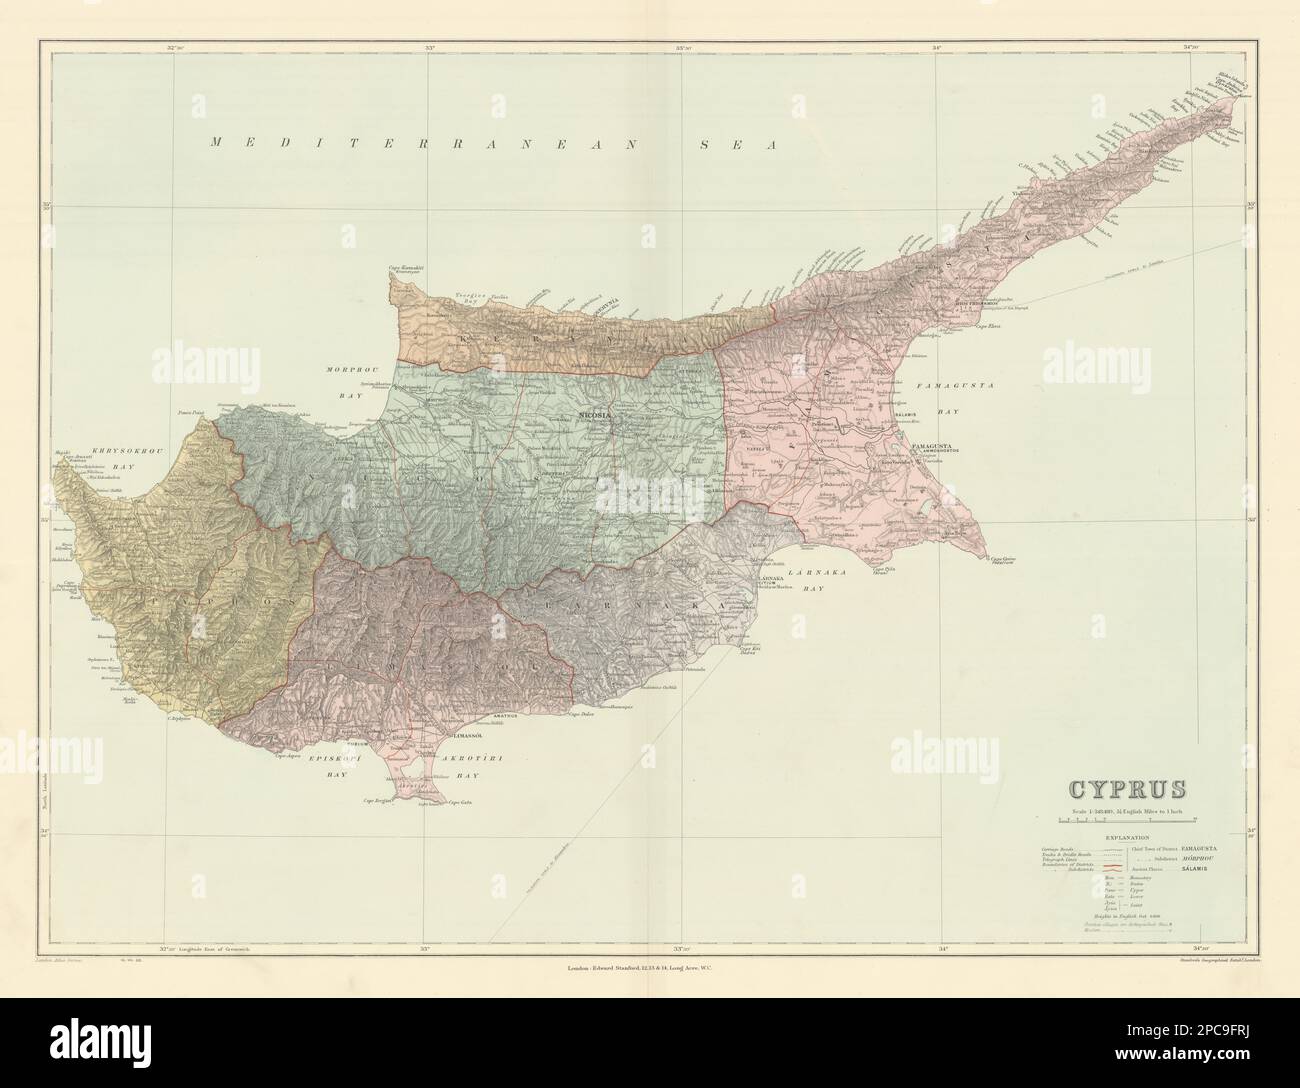 Cyprus. Districts. Ancient sites. Large 51x66cm. STANFORD 1904 old antique map Stock Photo